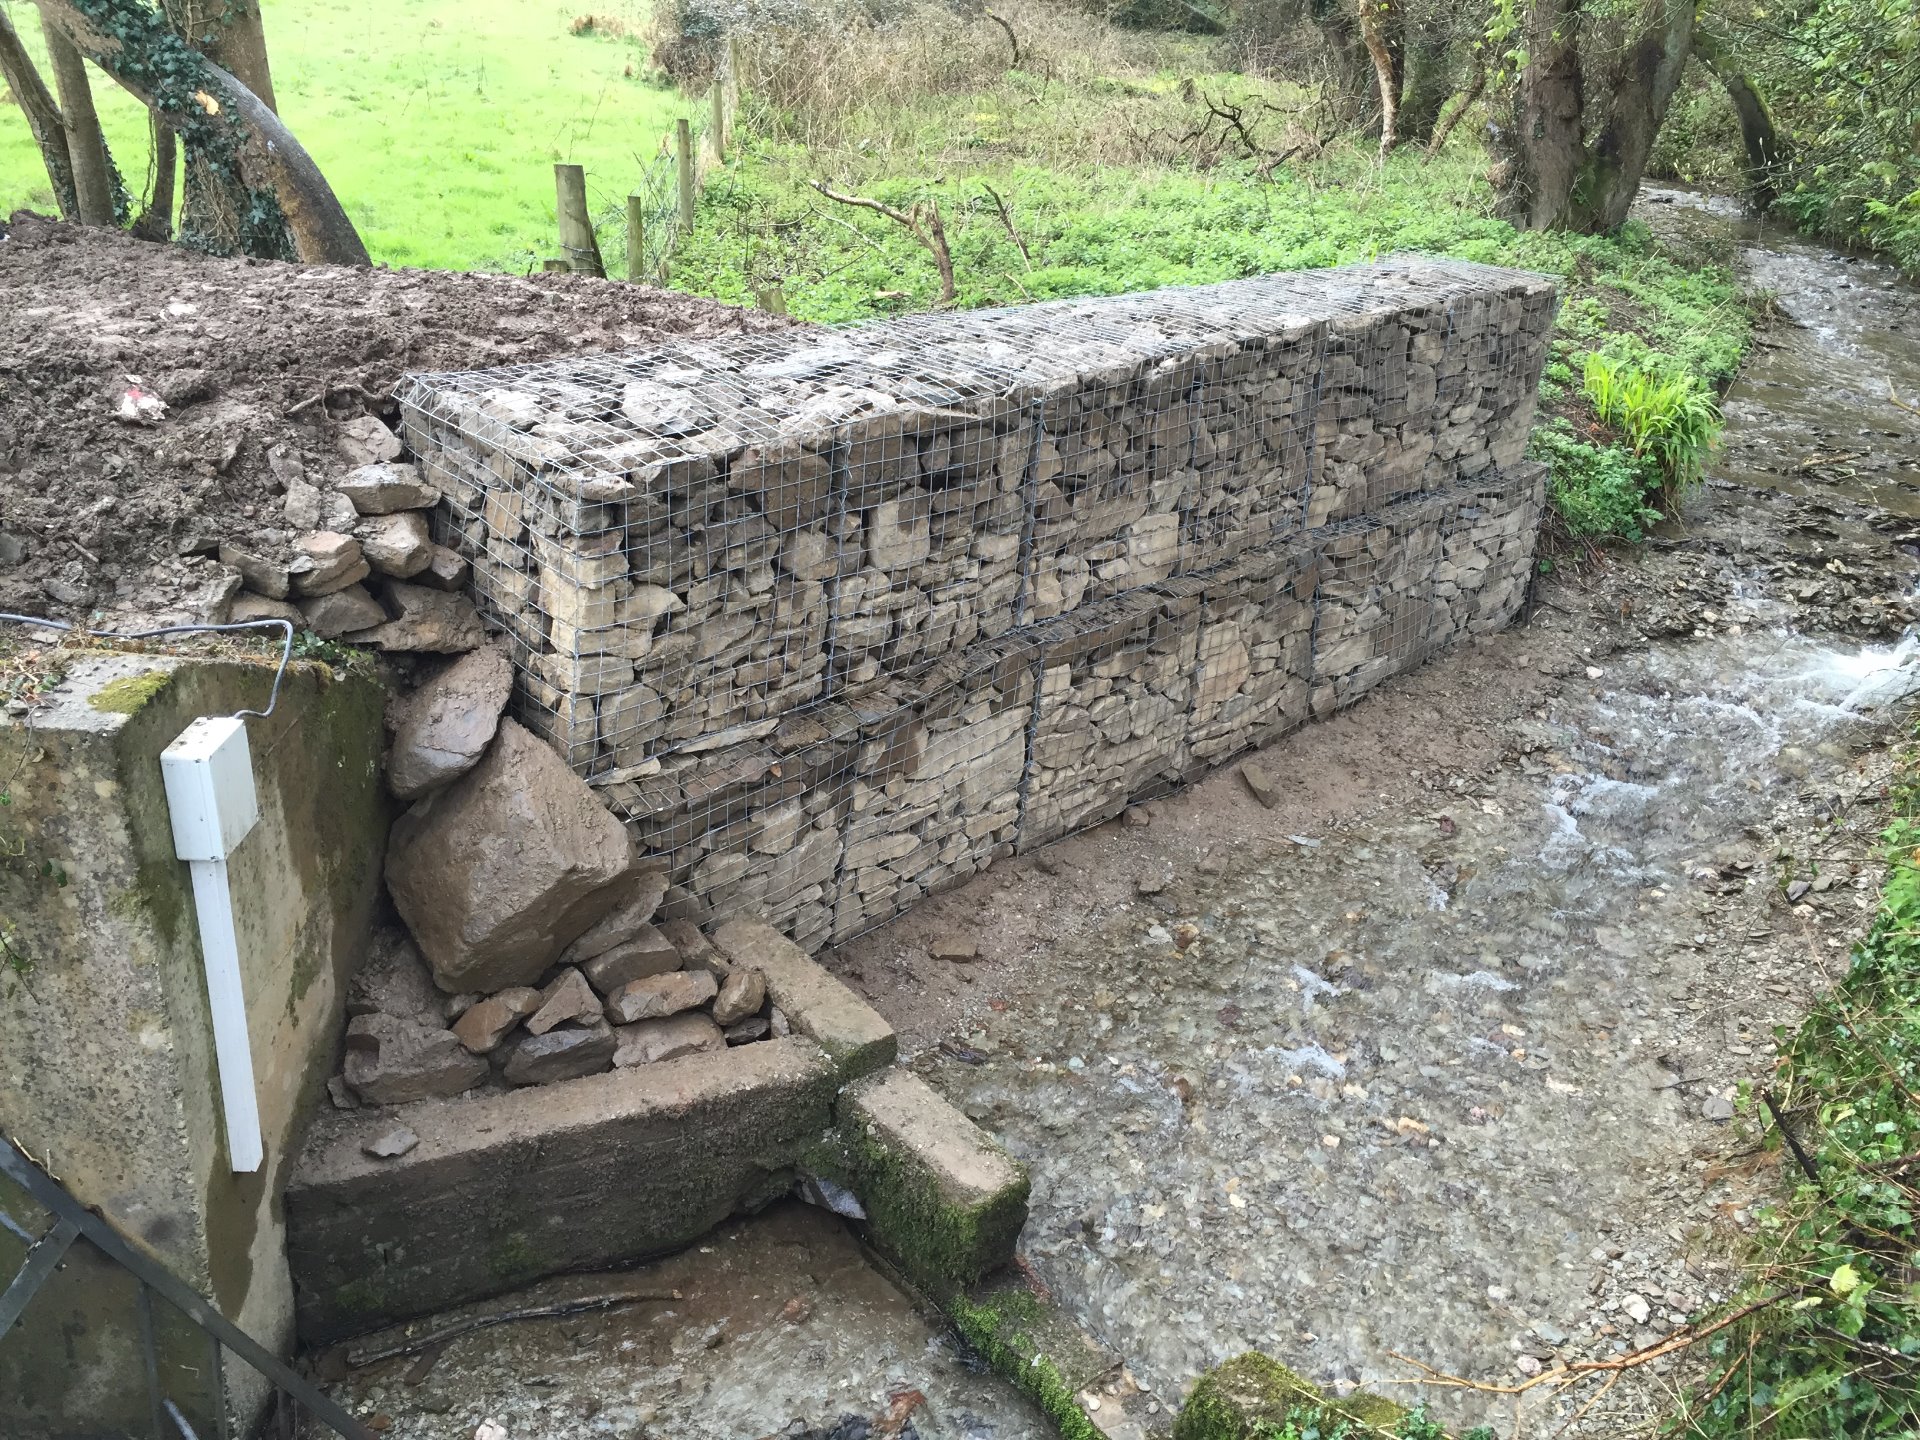 Two layers of gabion baskets were installed and back filled, this was to divert the water from its natural course, to avoid potential flooding of a North Devon Factory, built by MJS Building Maintenance Ltd.